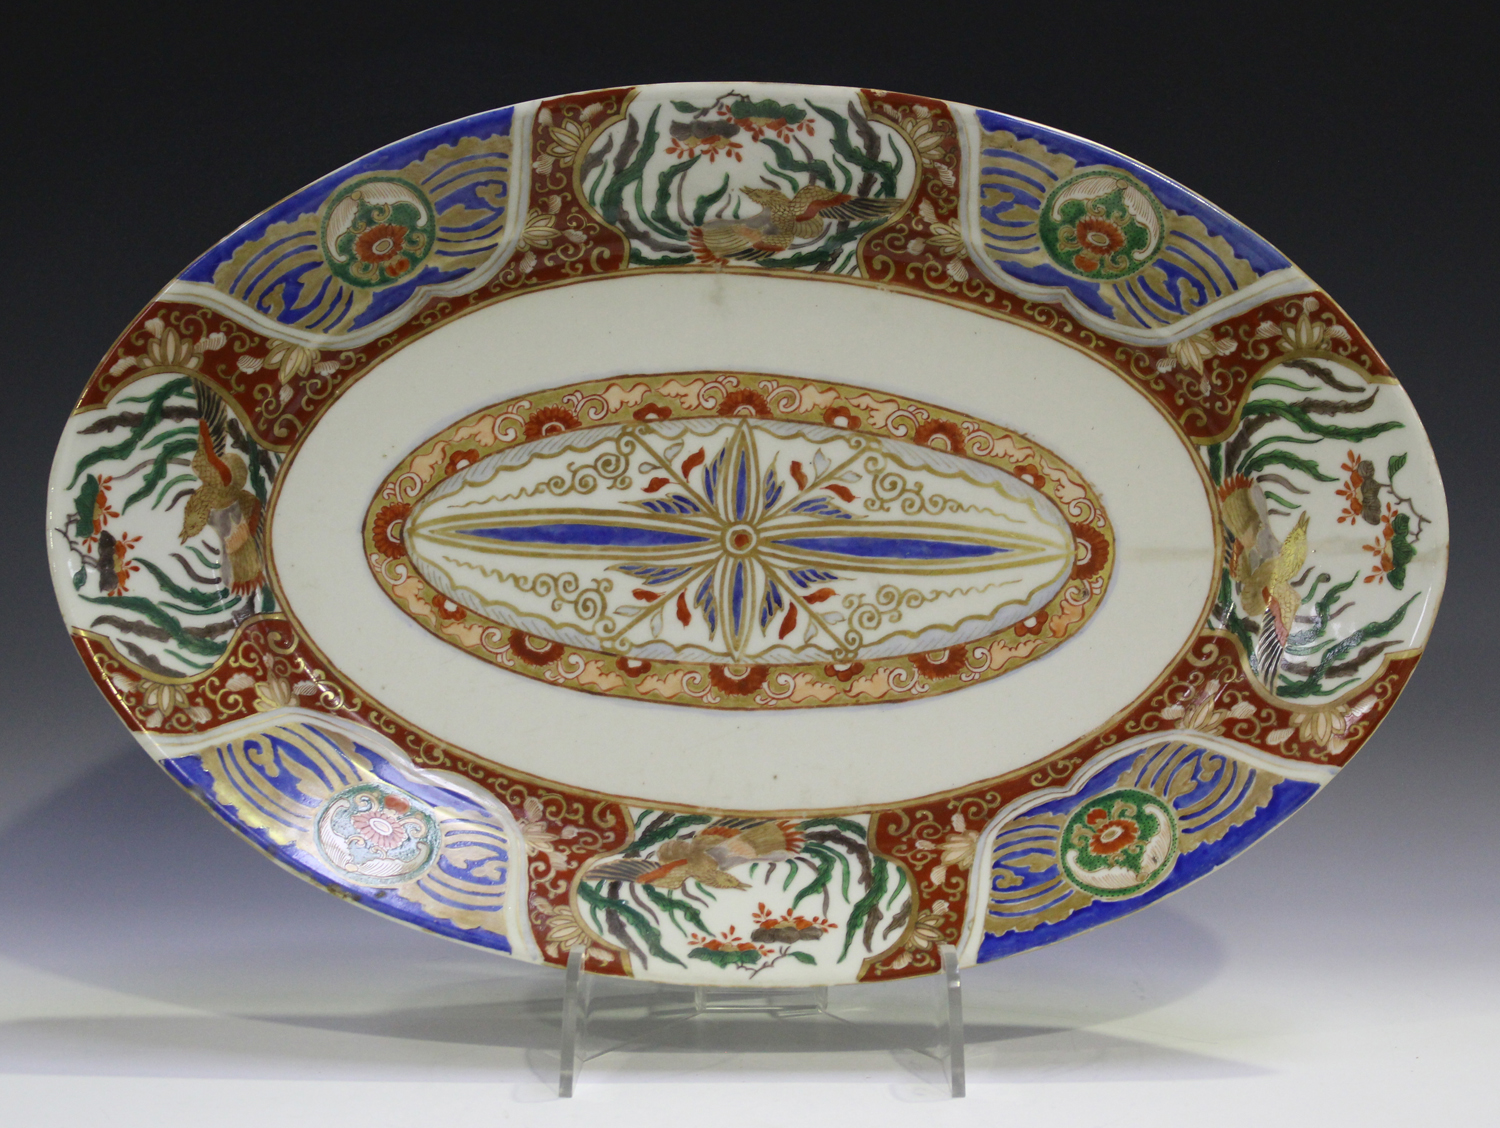 A Japanese Imari porcelain oval dish, Meiji period, painted and gilt with a central foliate